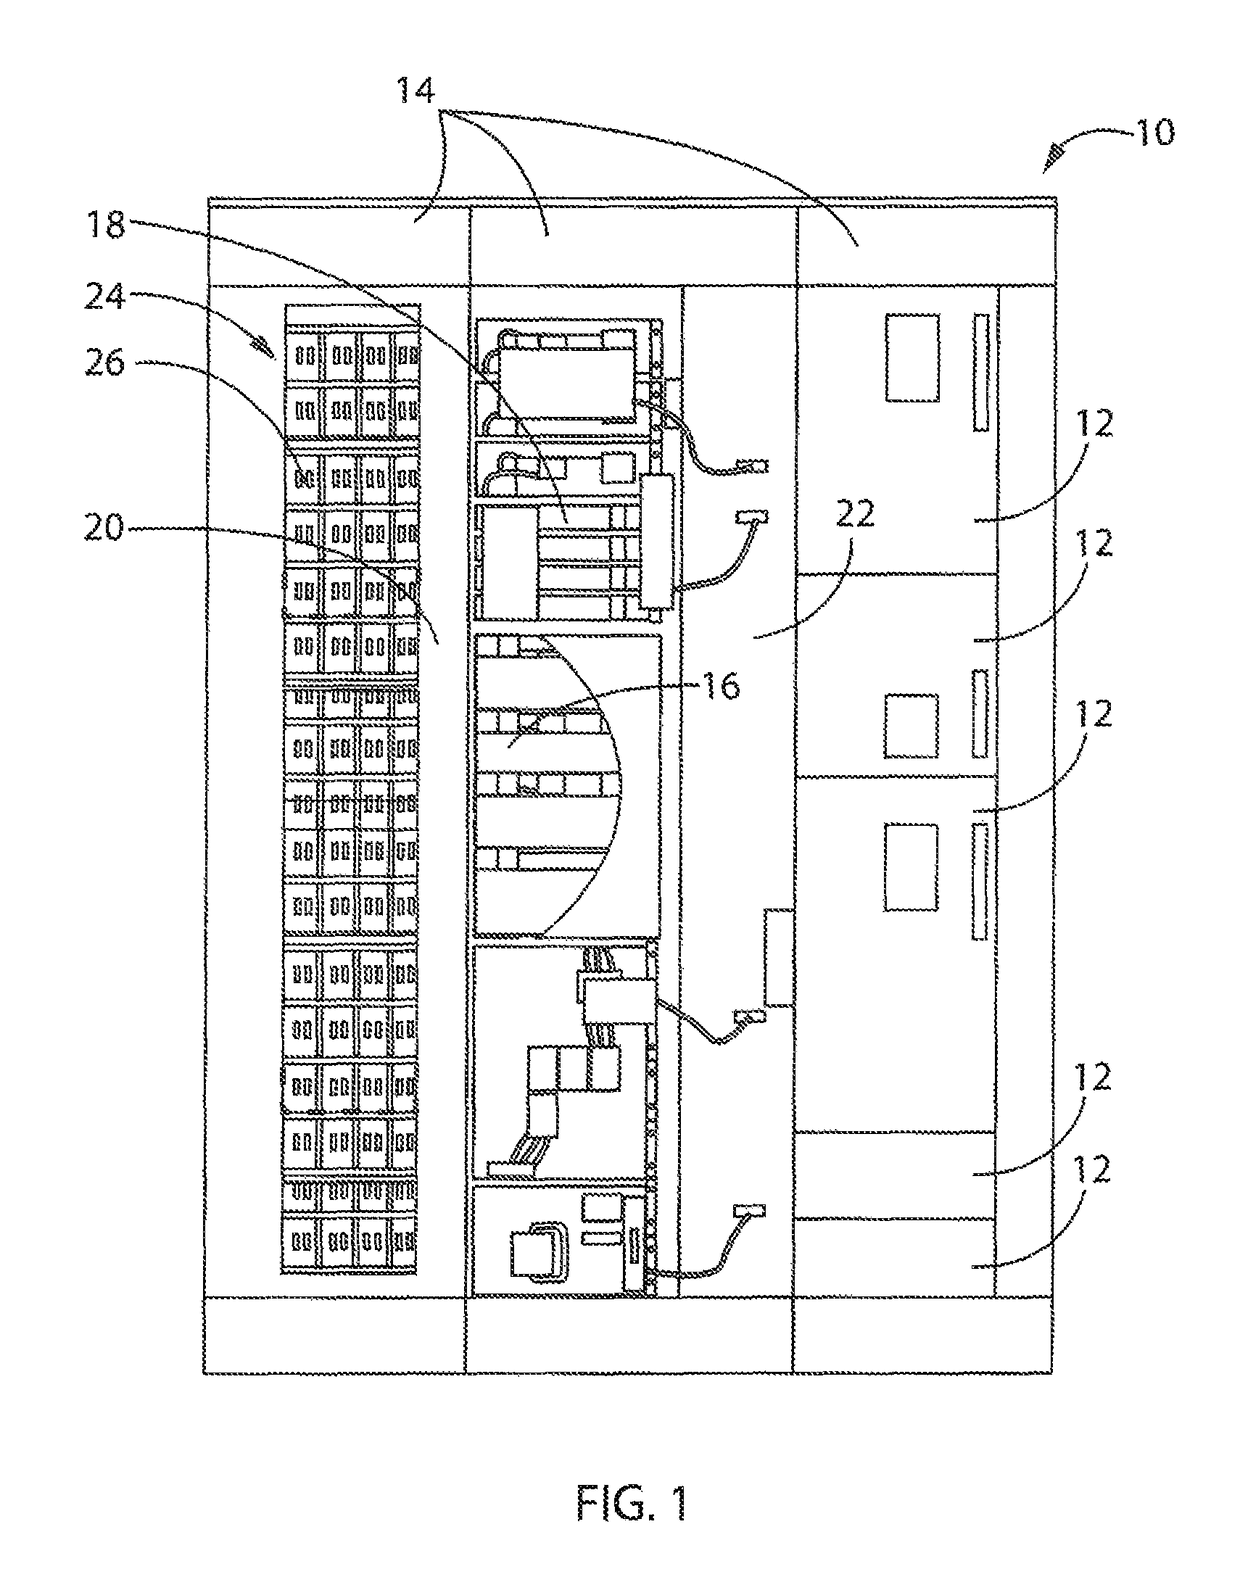 System for isolating power conductors using molded assemblies